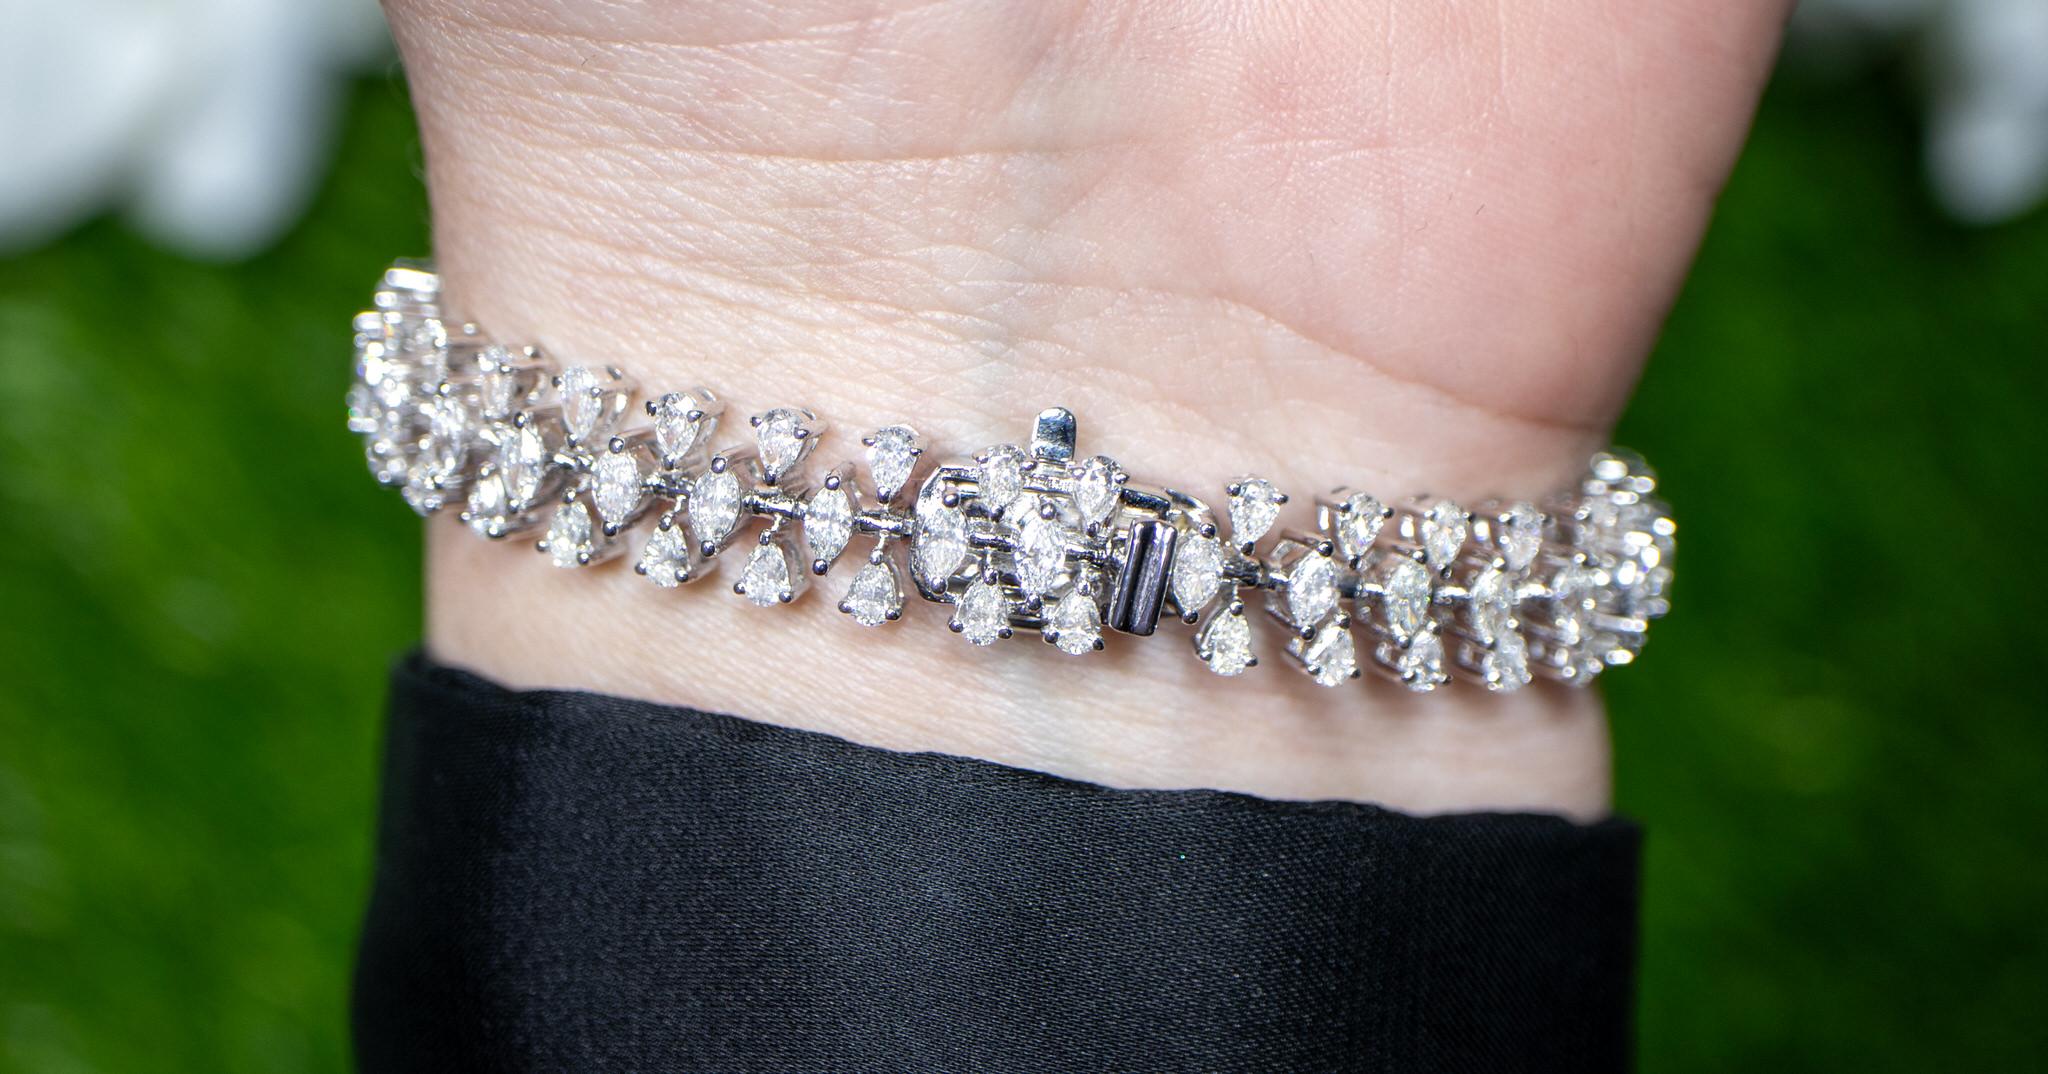 Important Marquise and Pear Cut Diamond Bracelet 6.65 Carats 18K White Gold In Excellent Condition For Sale In Laguna Niguel, CA